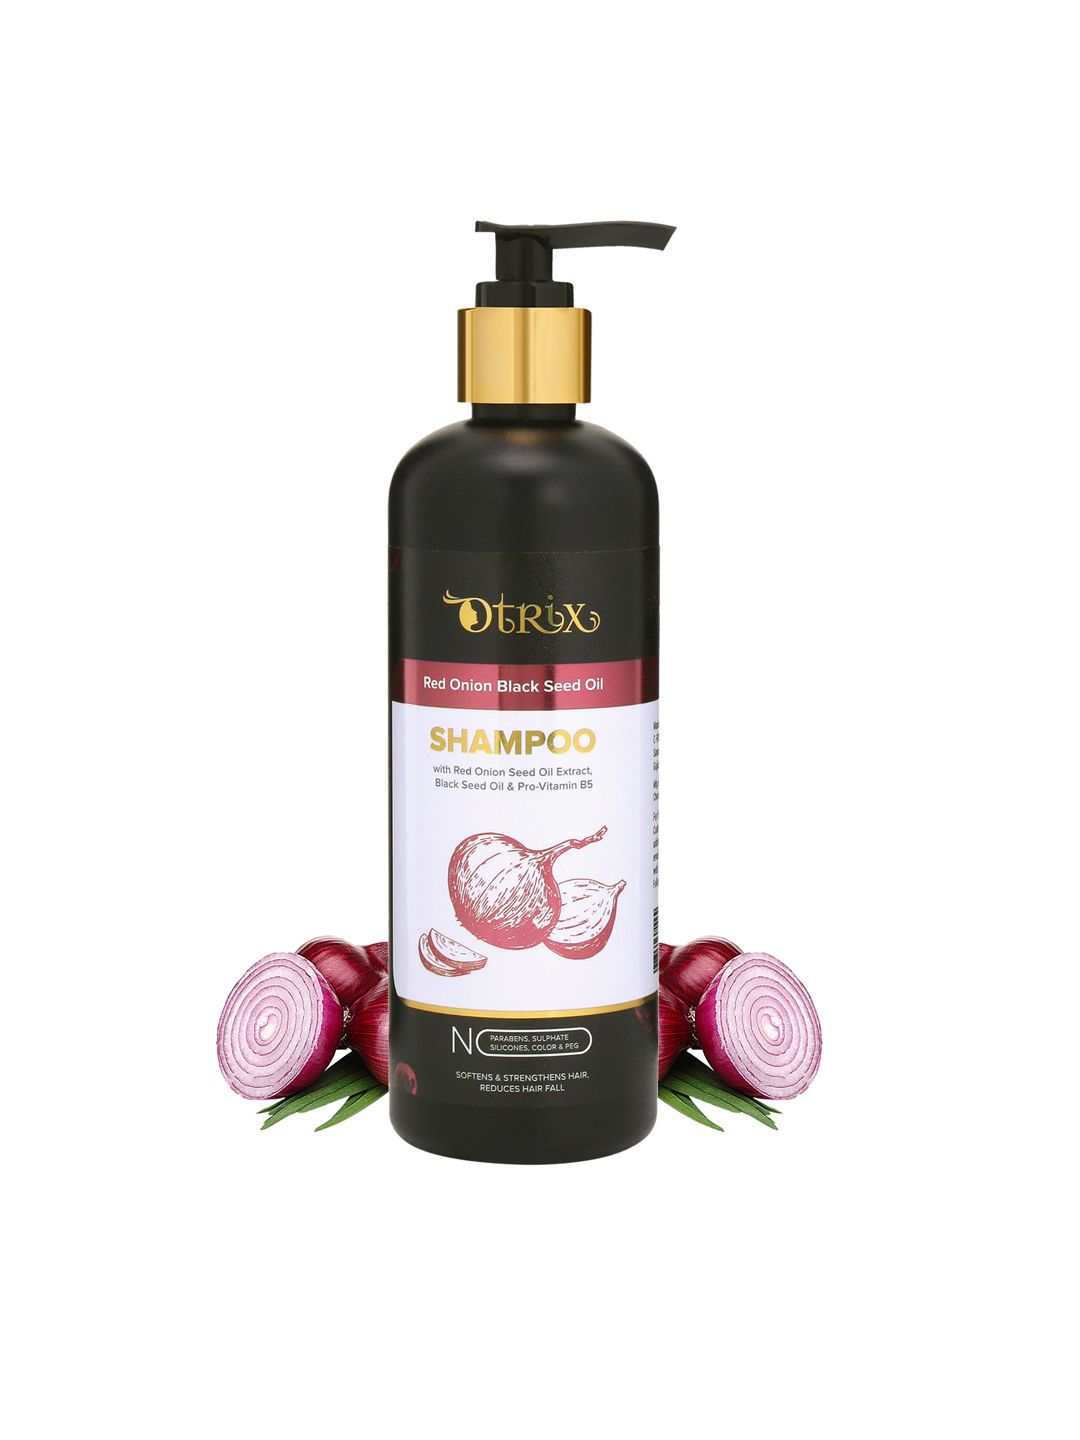 Otrix Red Onion Black Seed Oil Shampoo To Soften & Strengthen Hair - 300 ml Price in India